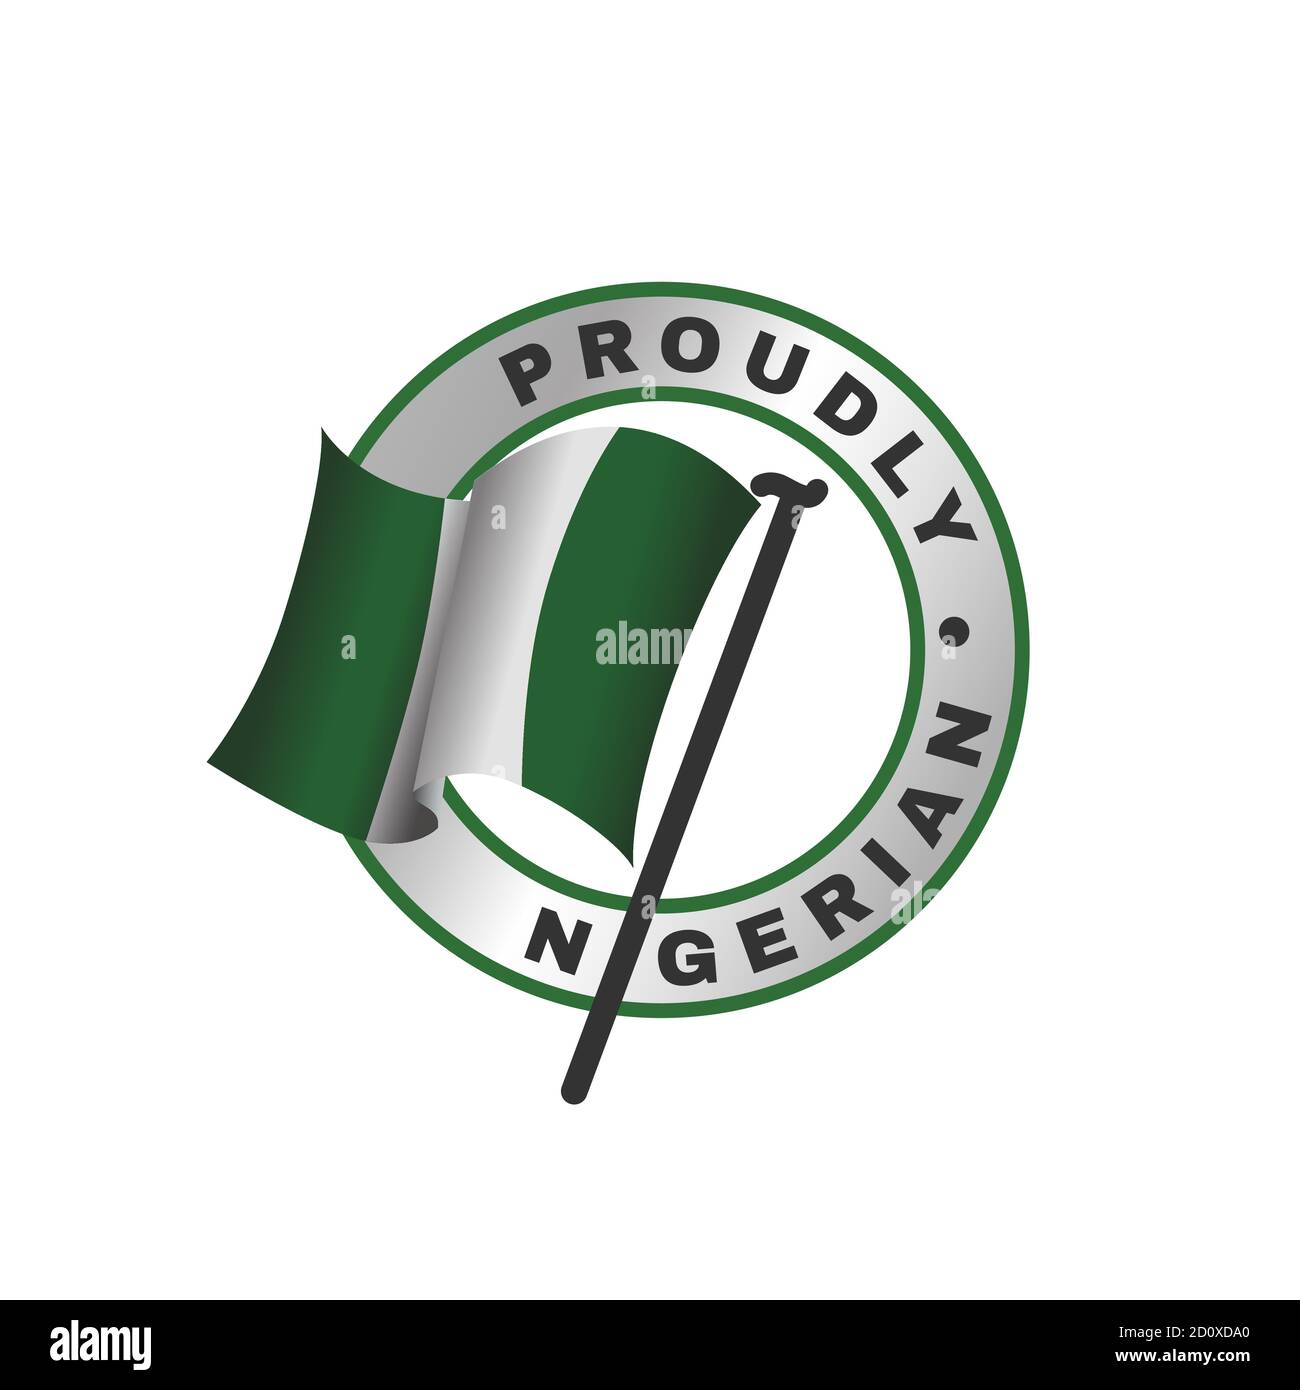 Nigeria Logos - An open source project